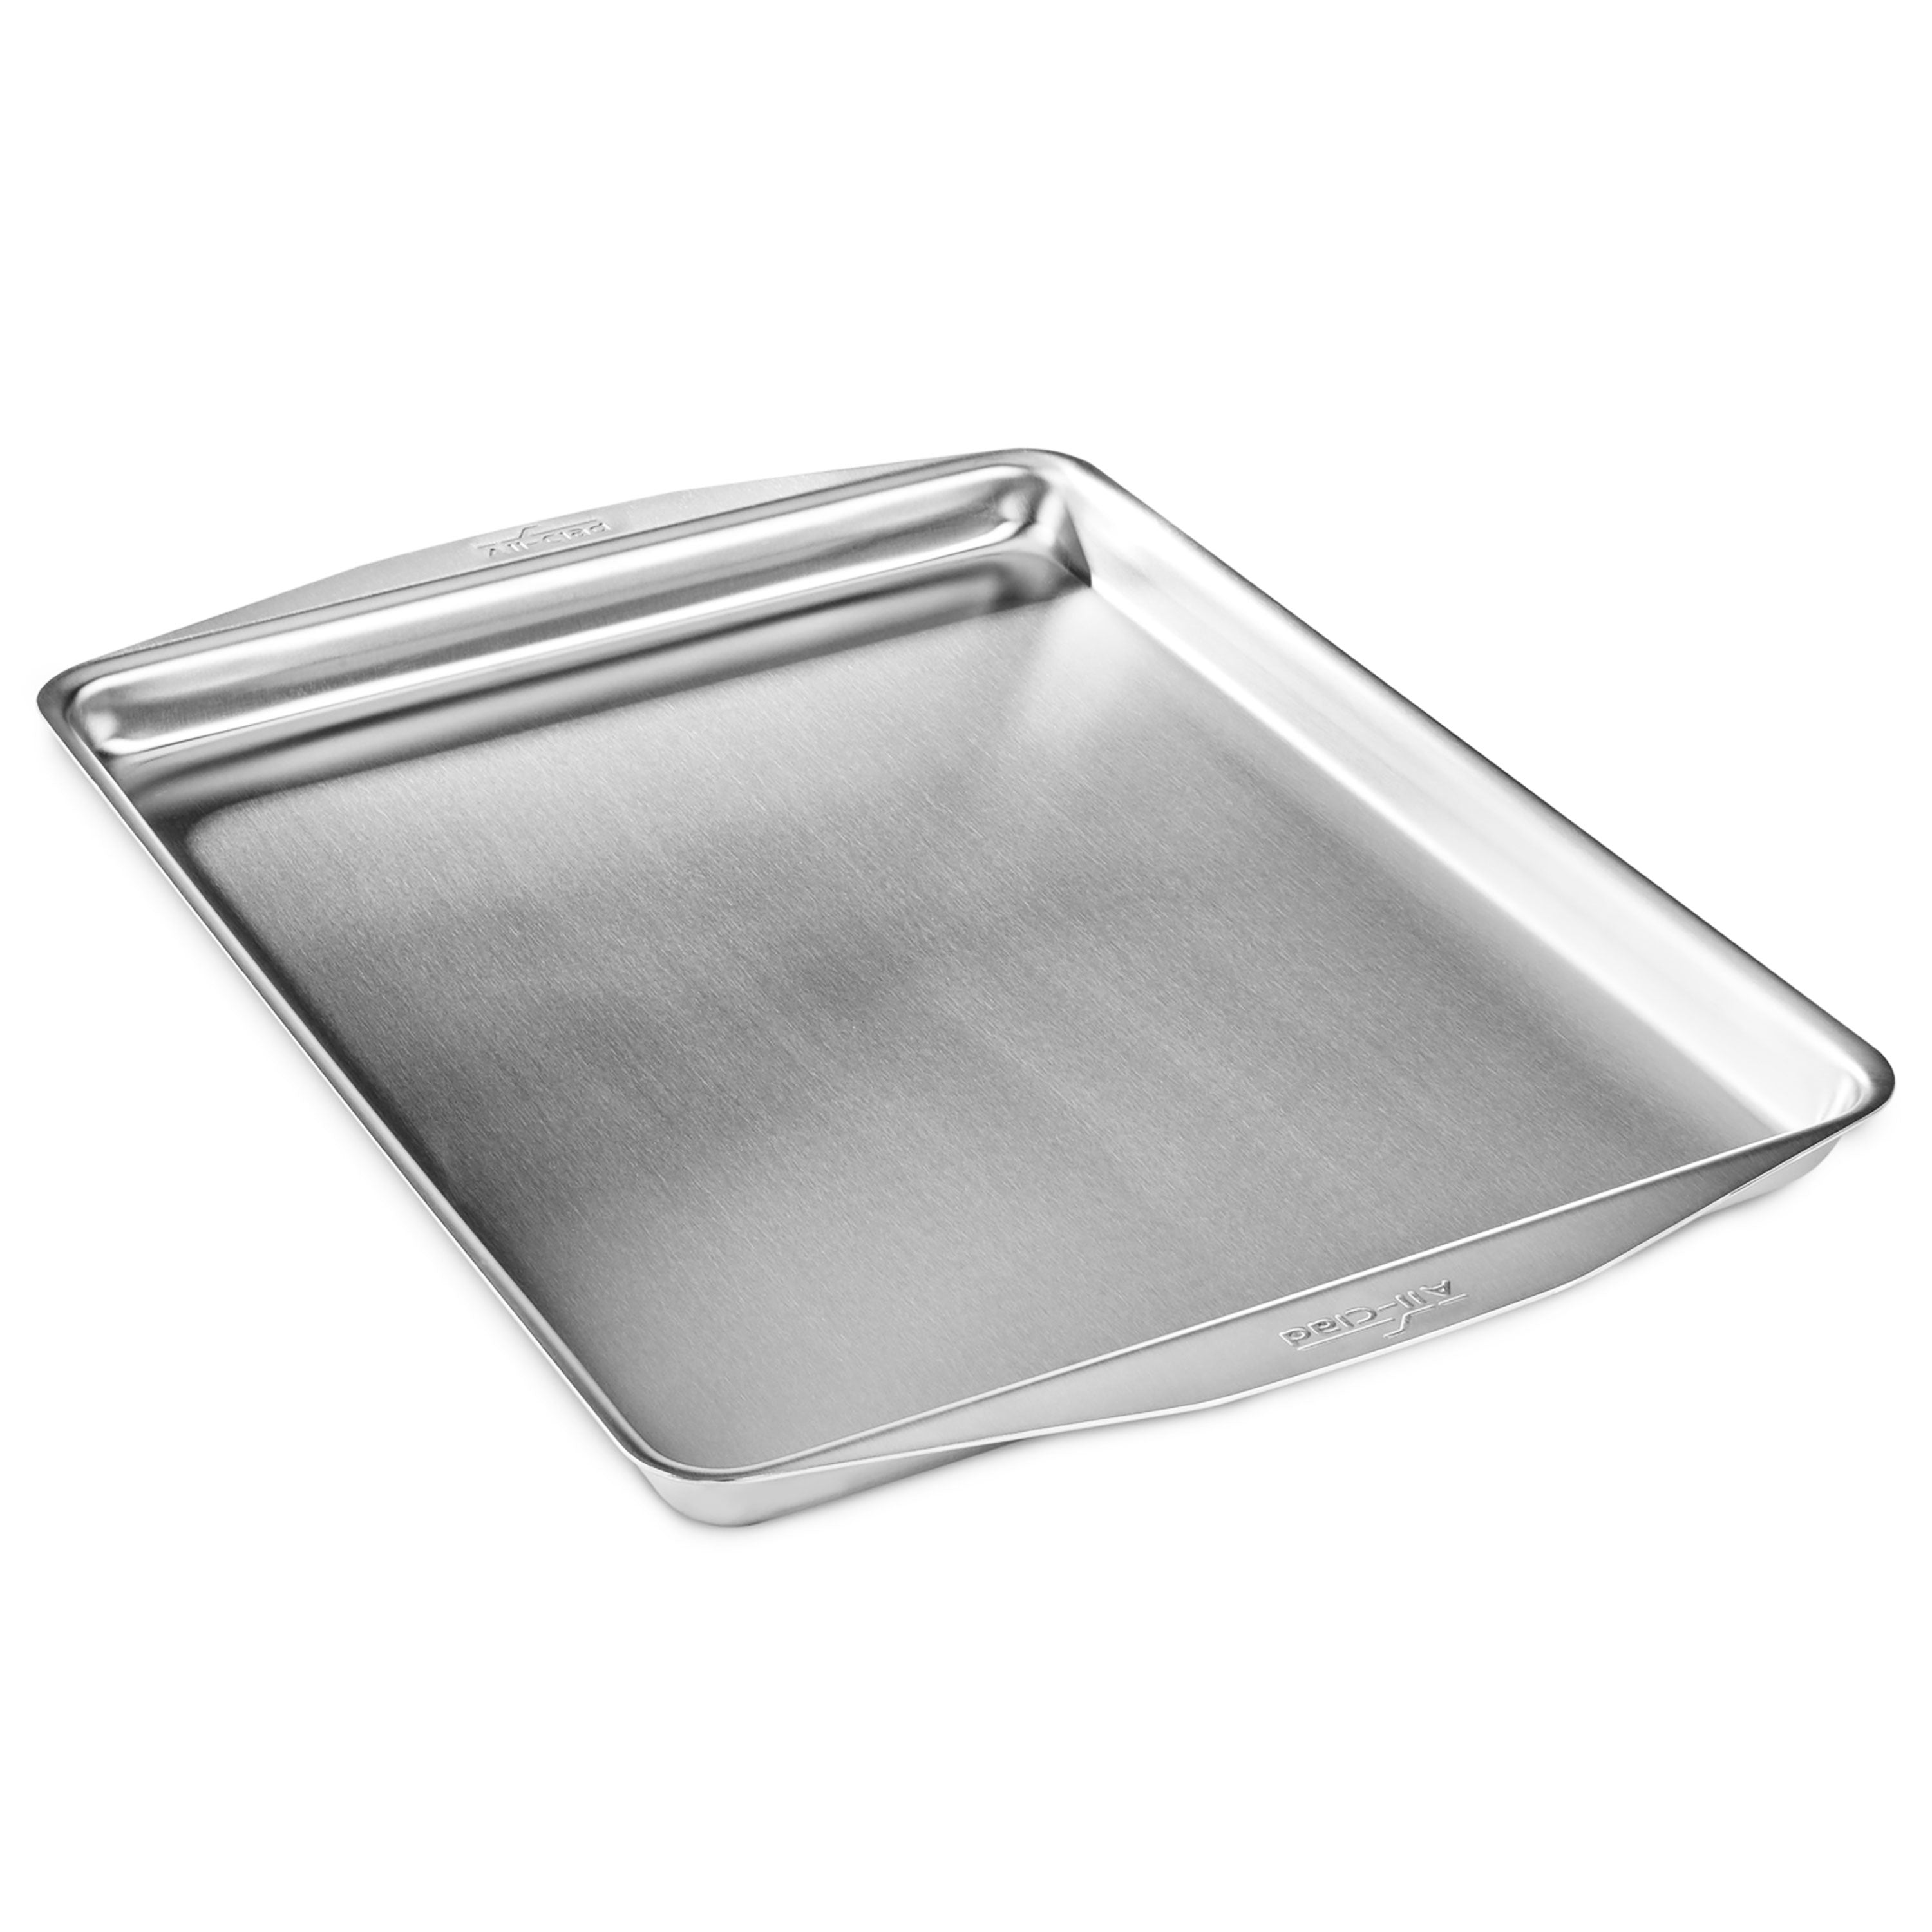 All-Clad Jelly Roll Pan - Tri-Ply Stainless Steel – Cutlery and More